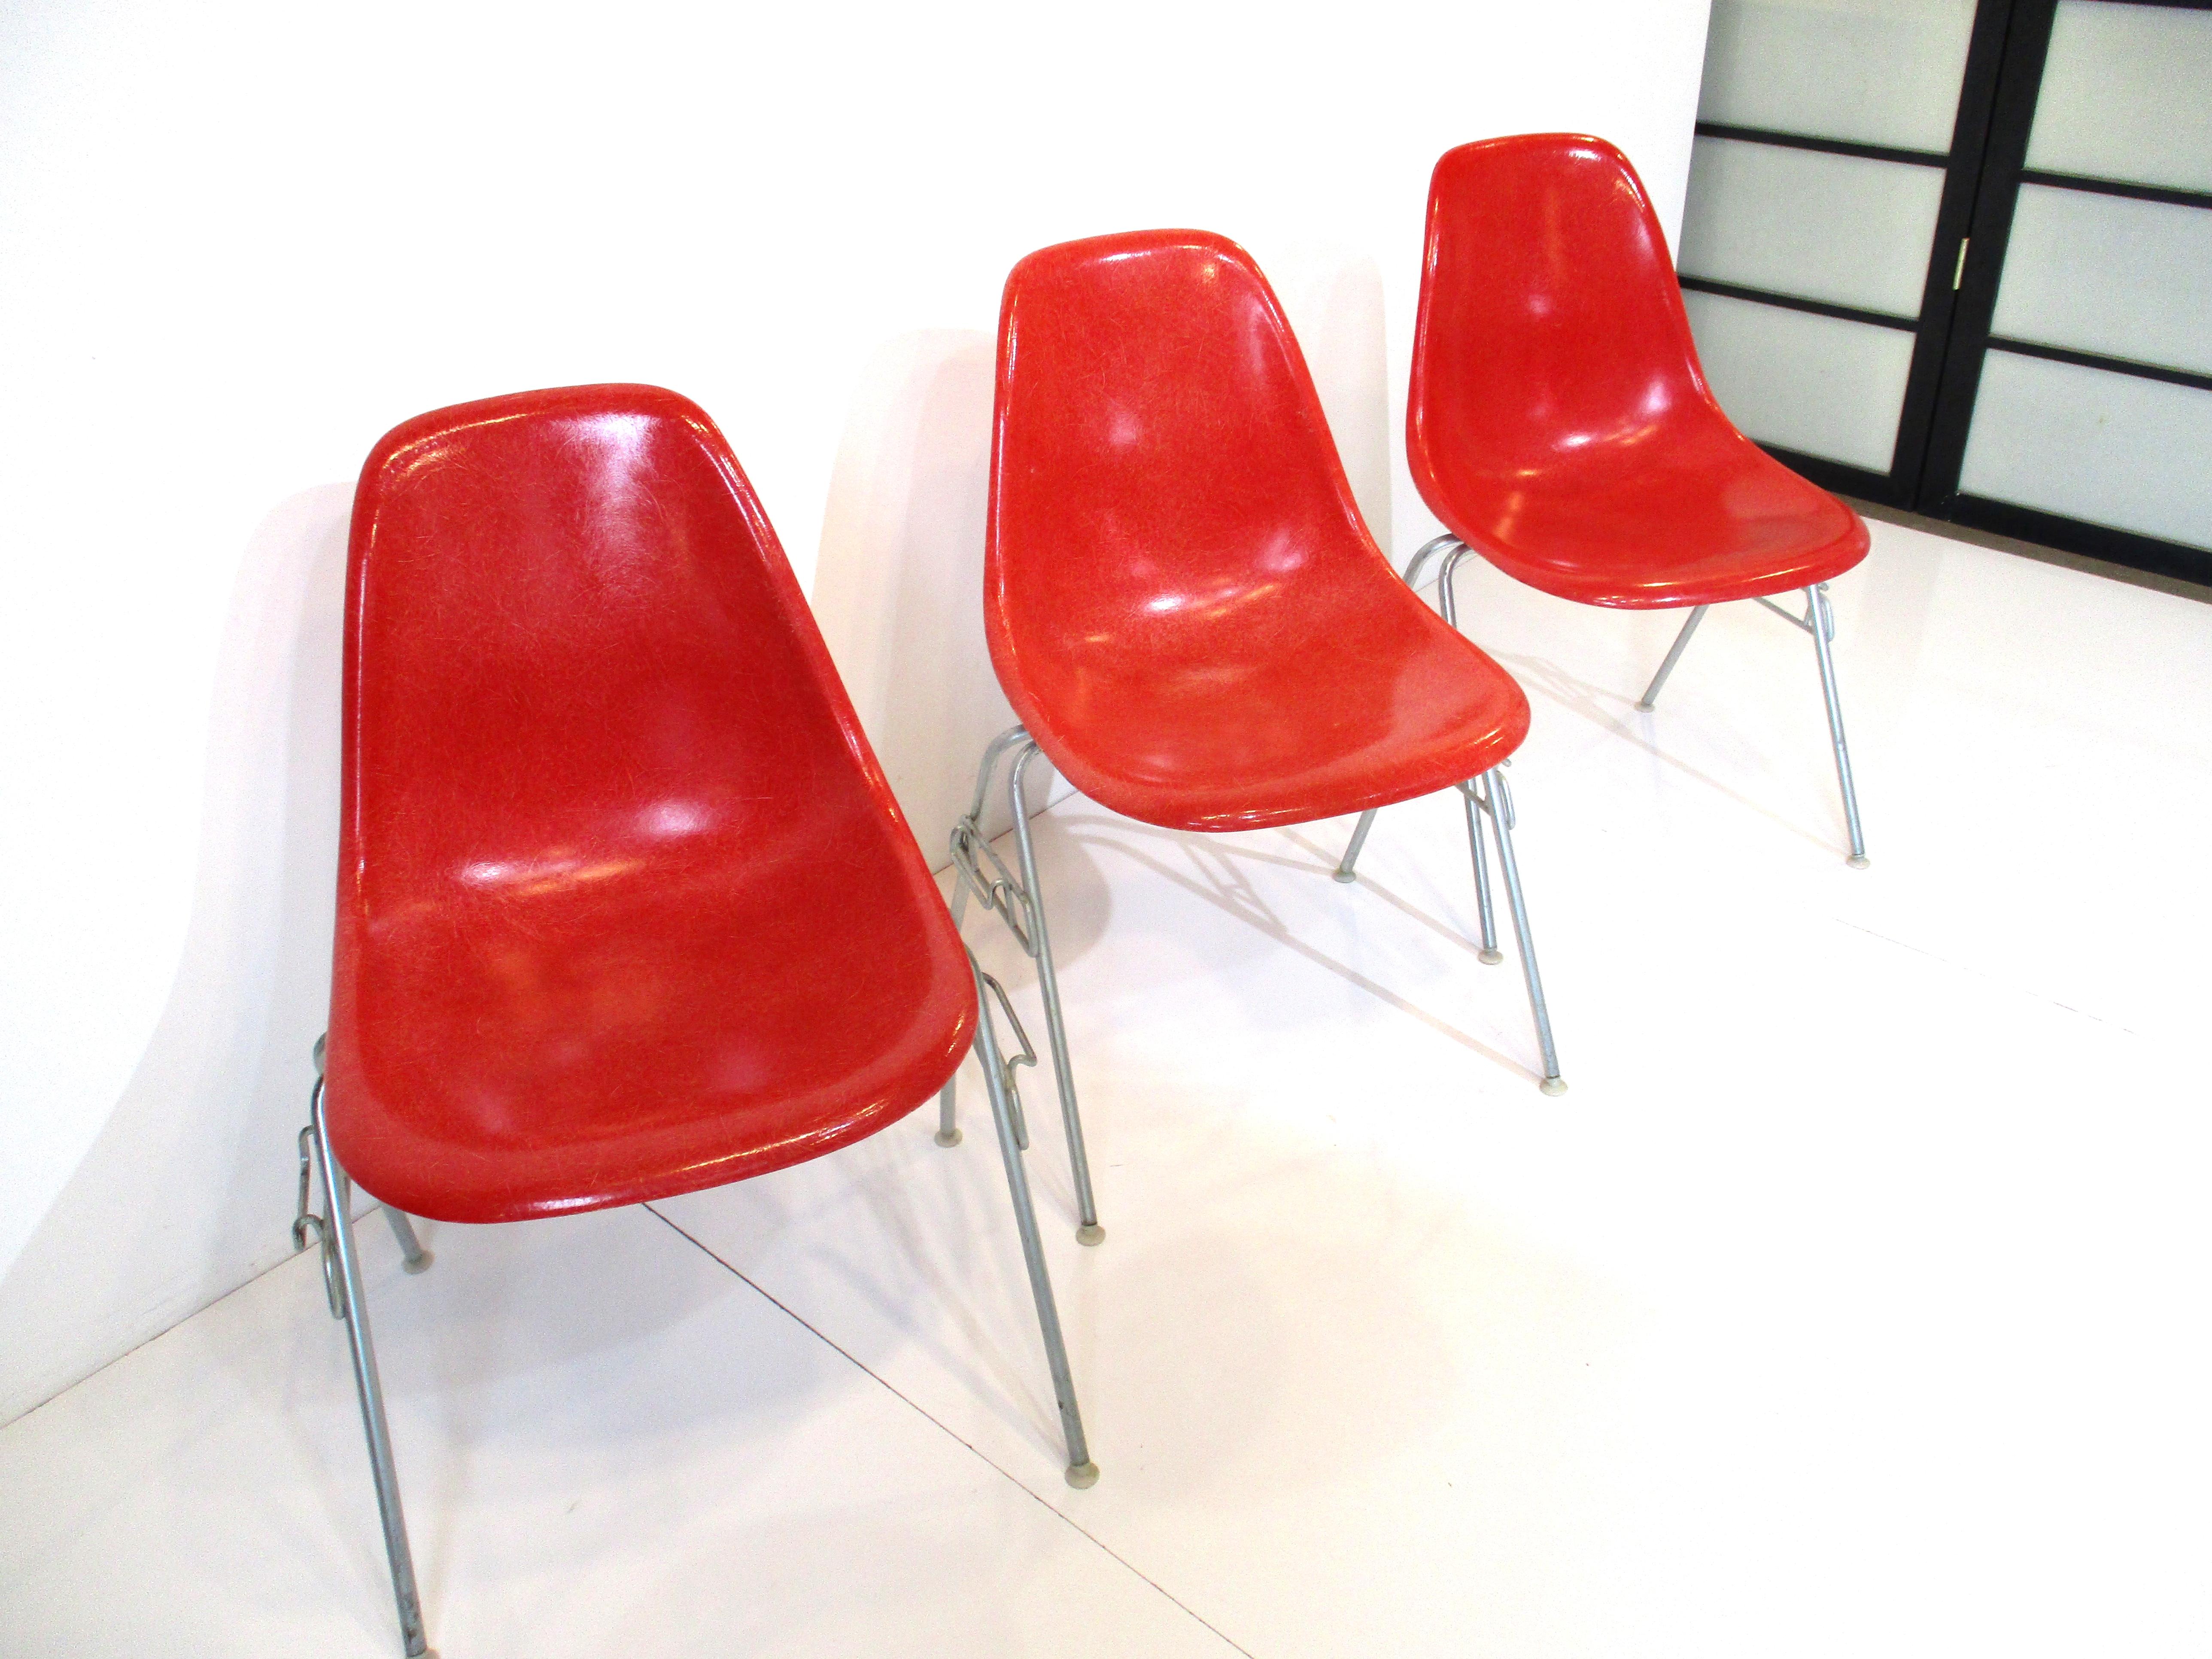 A set of three fiberglass DSS stacking dining chairs with zinc H bases and nylon foot pads . The colors are dark orange , dark red and red with the Herman Miller molded manufactures mark and to the bottoms.